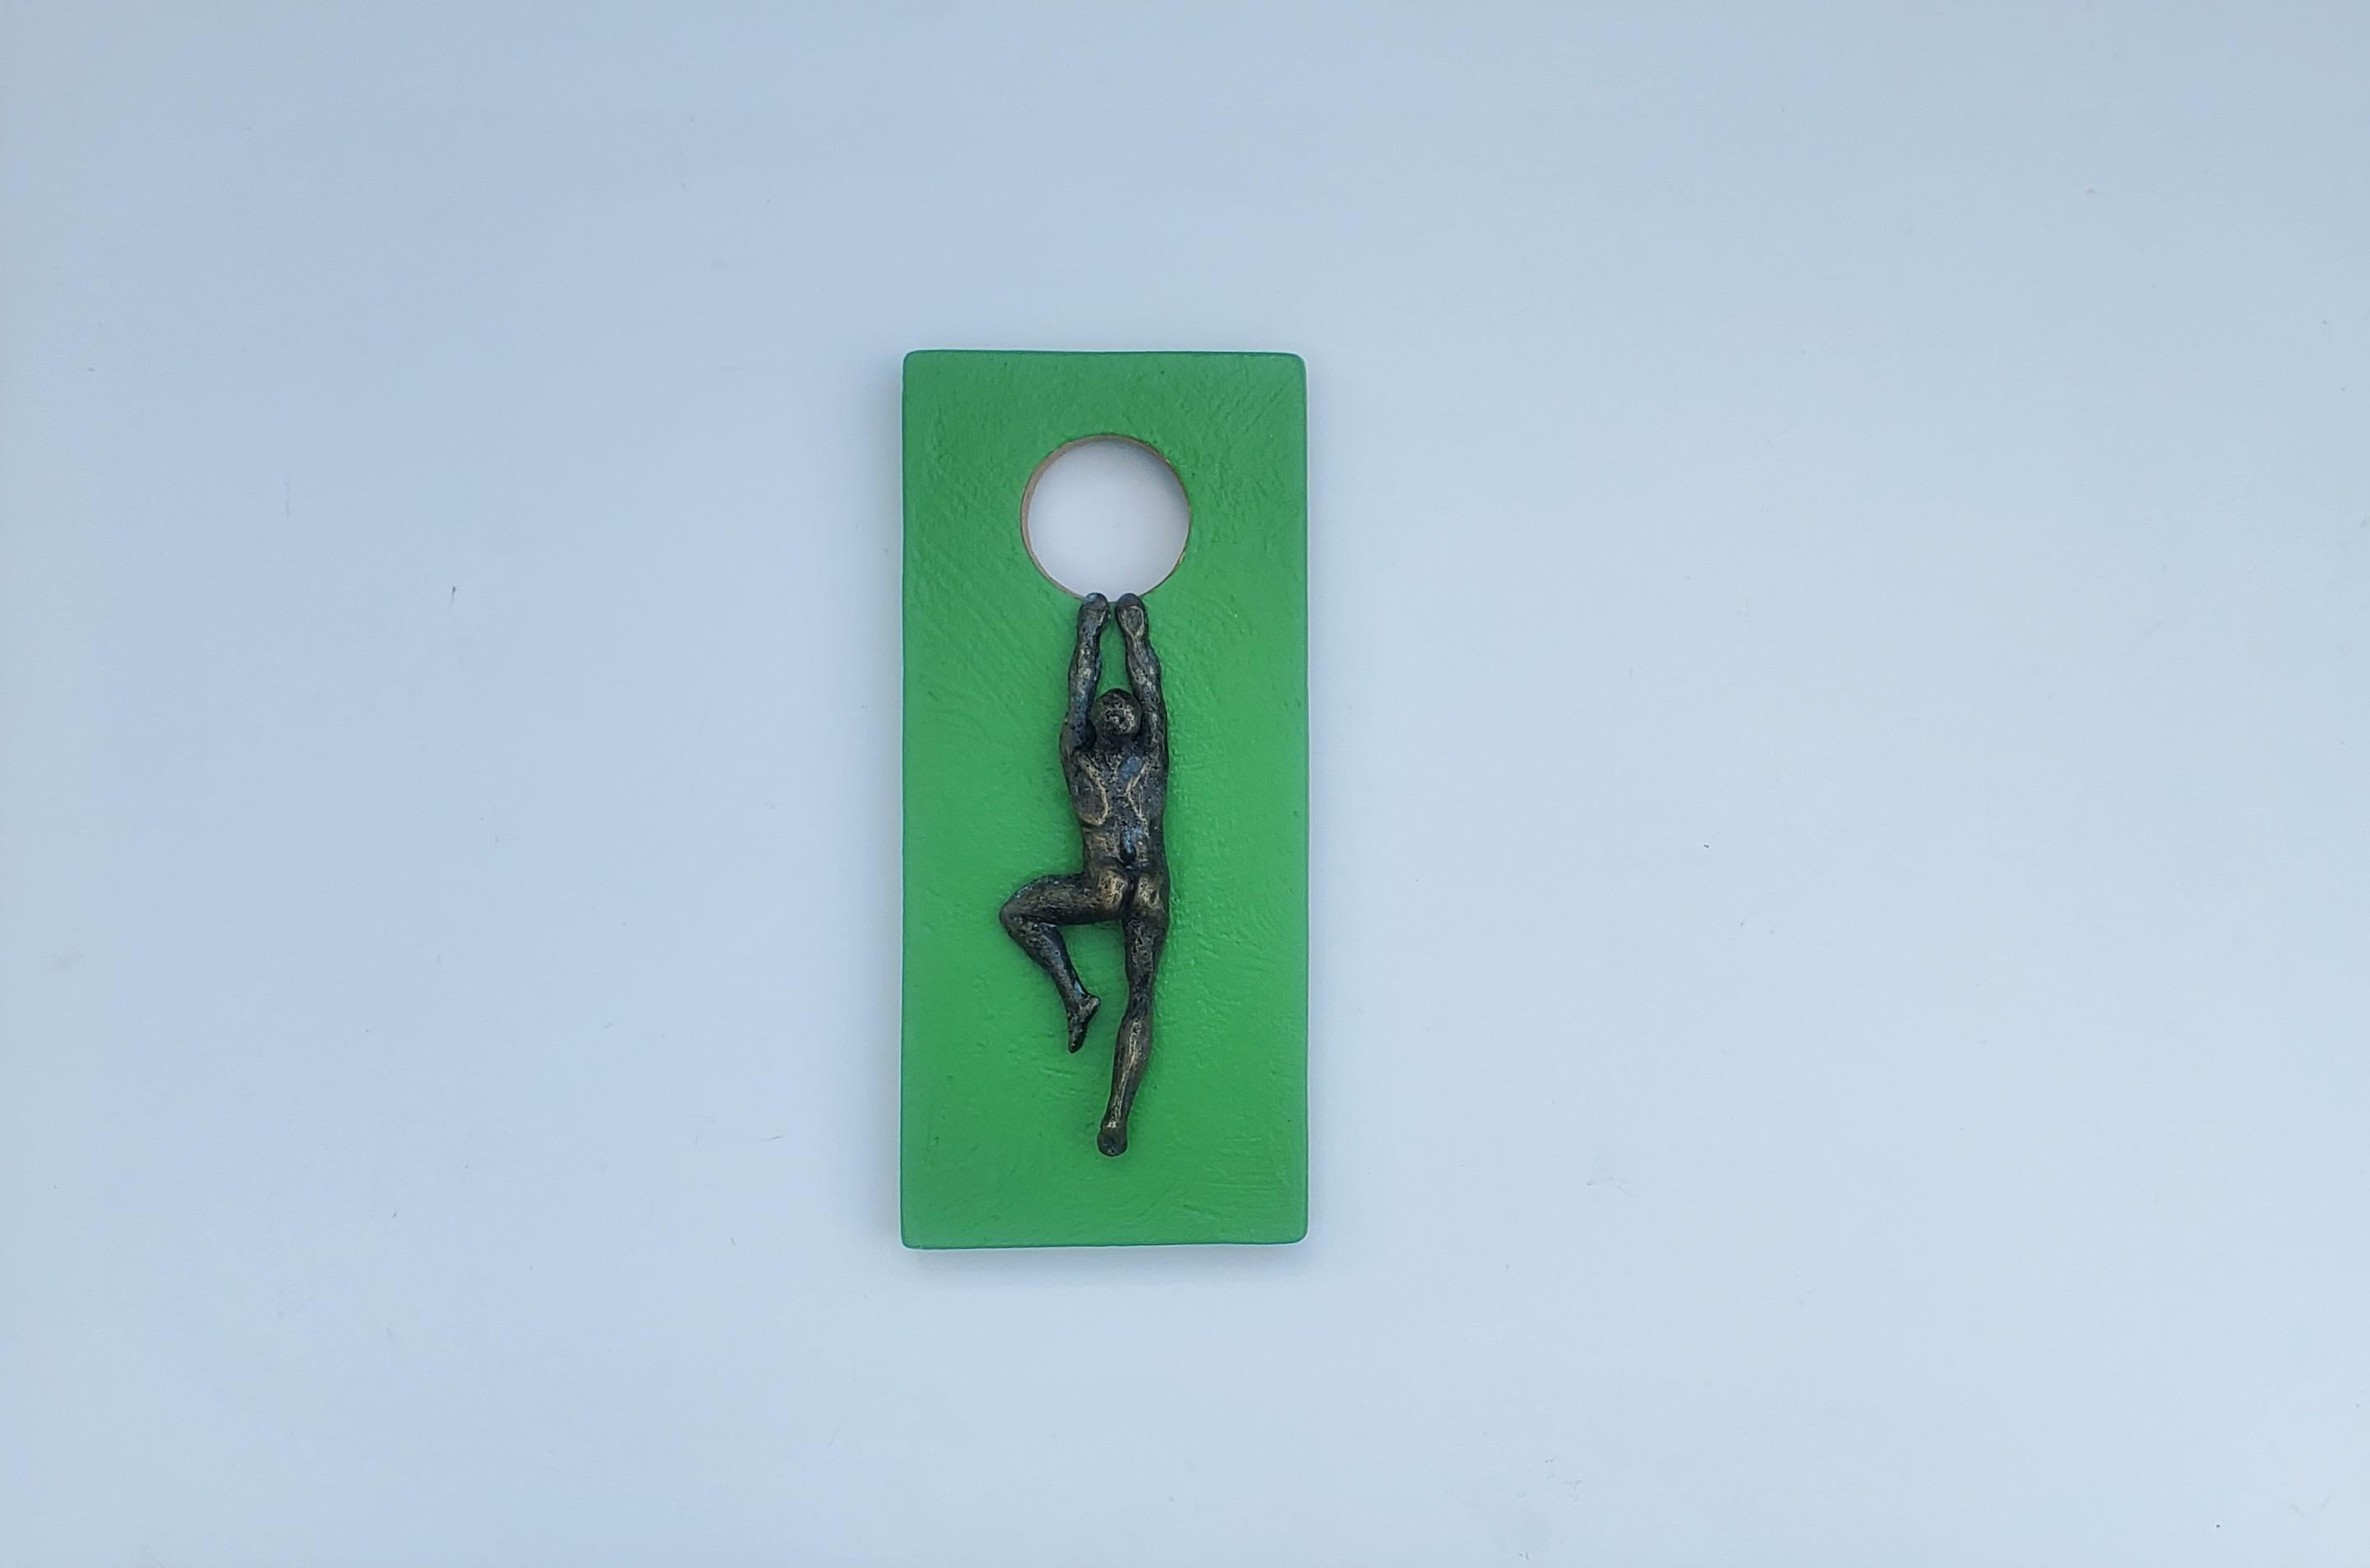 <p>Artist Comments<br>Artist Yelitza Diaz exhibits a man climbing a carved wooden structure painted in green. She creates the nude form with resin and paints its body bronze for a metallic impression. The hole depicts a full moon, representing the